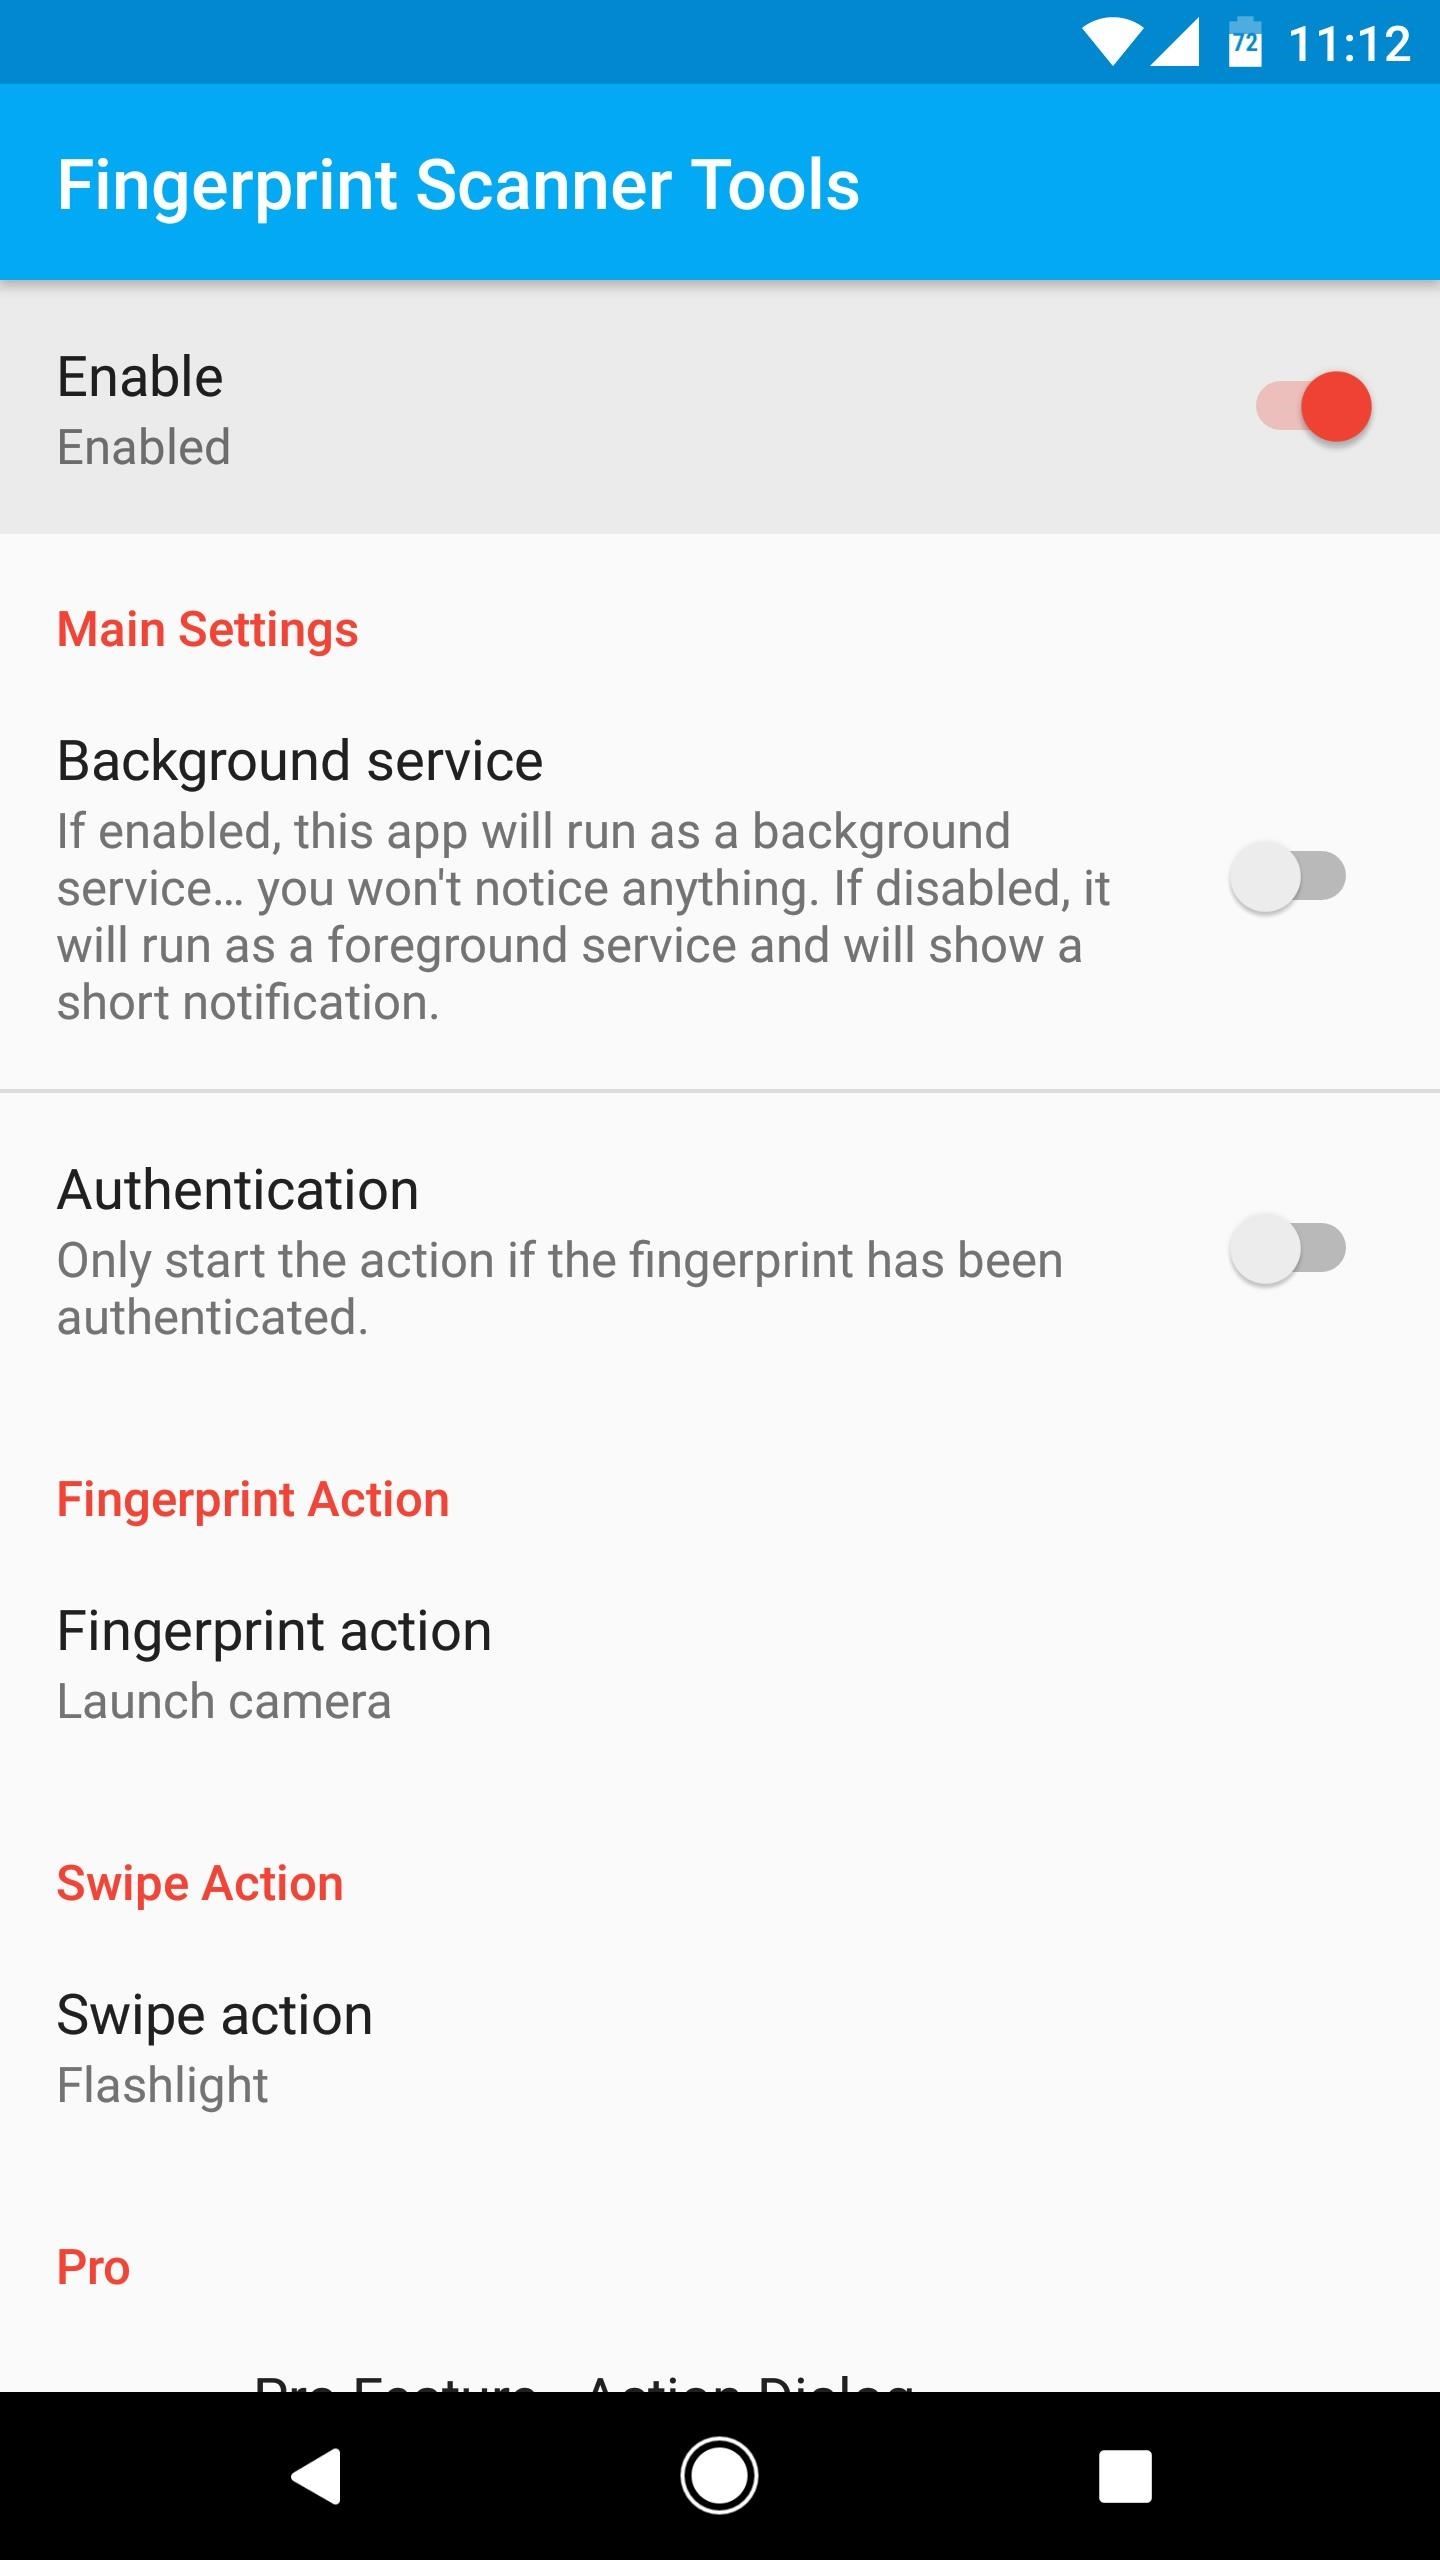 How to Use Your Fingerprint Scanner to Do Almost Anything with Tasker